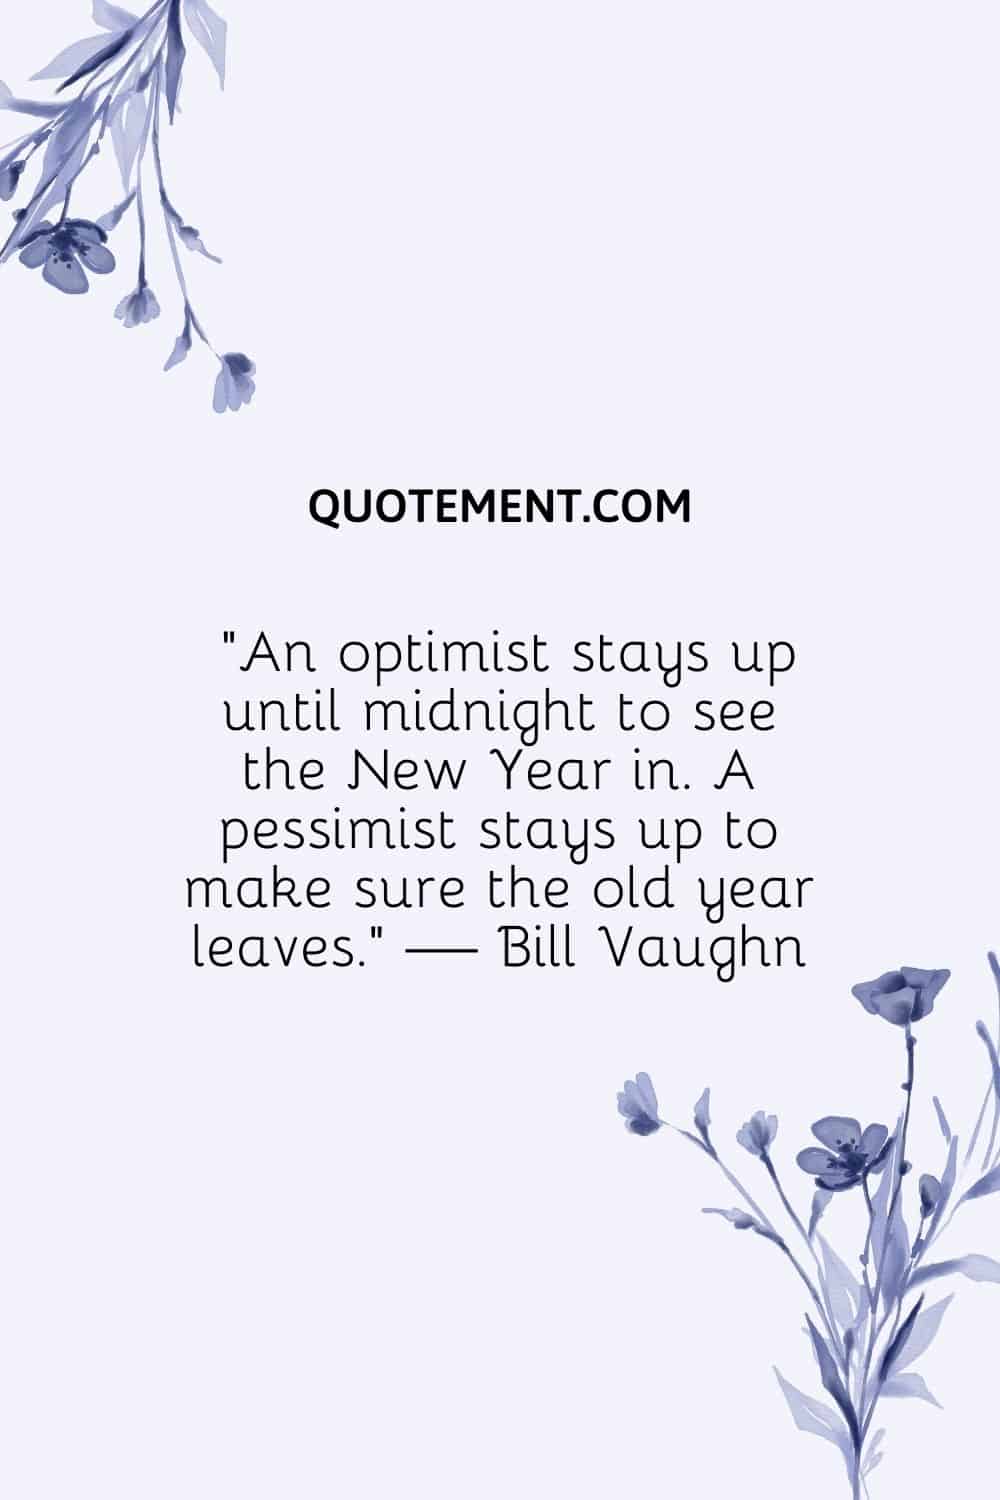 An optimist stays up until midnight to see the New Year in